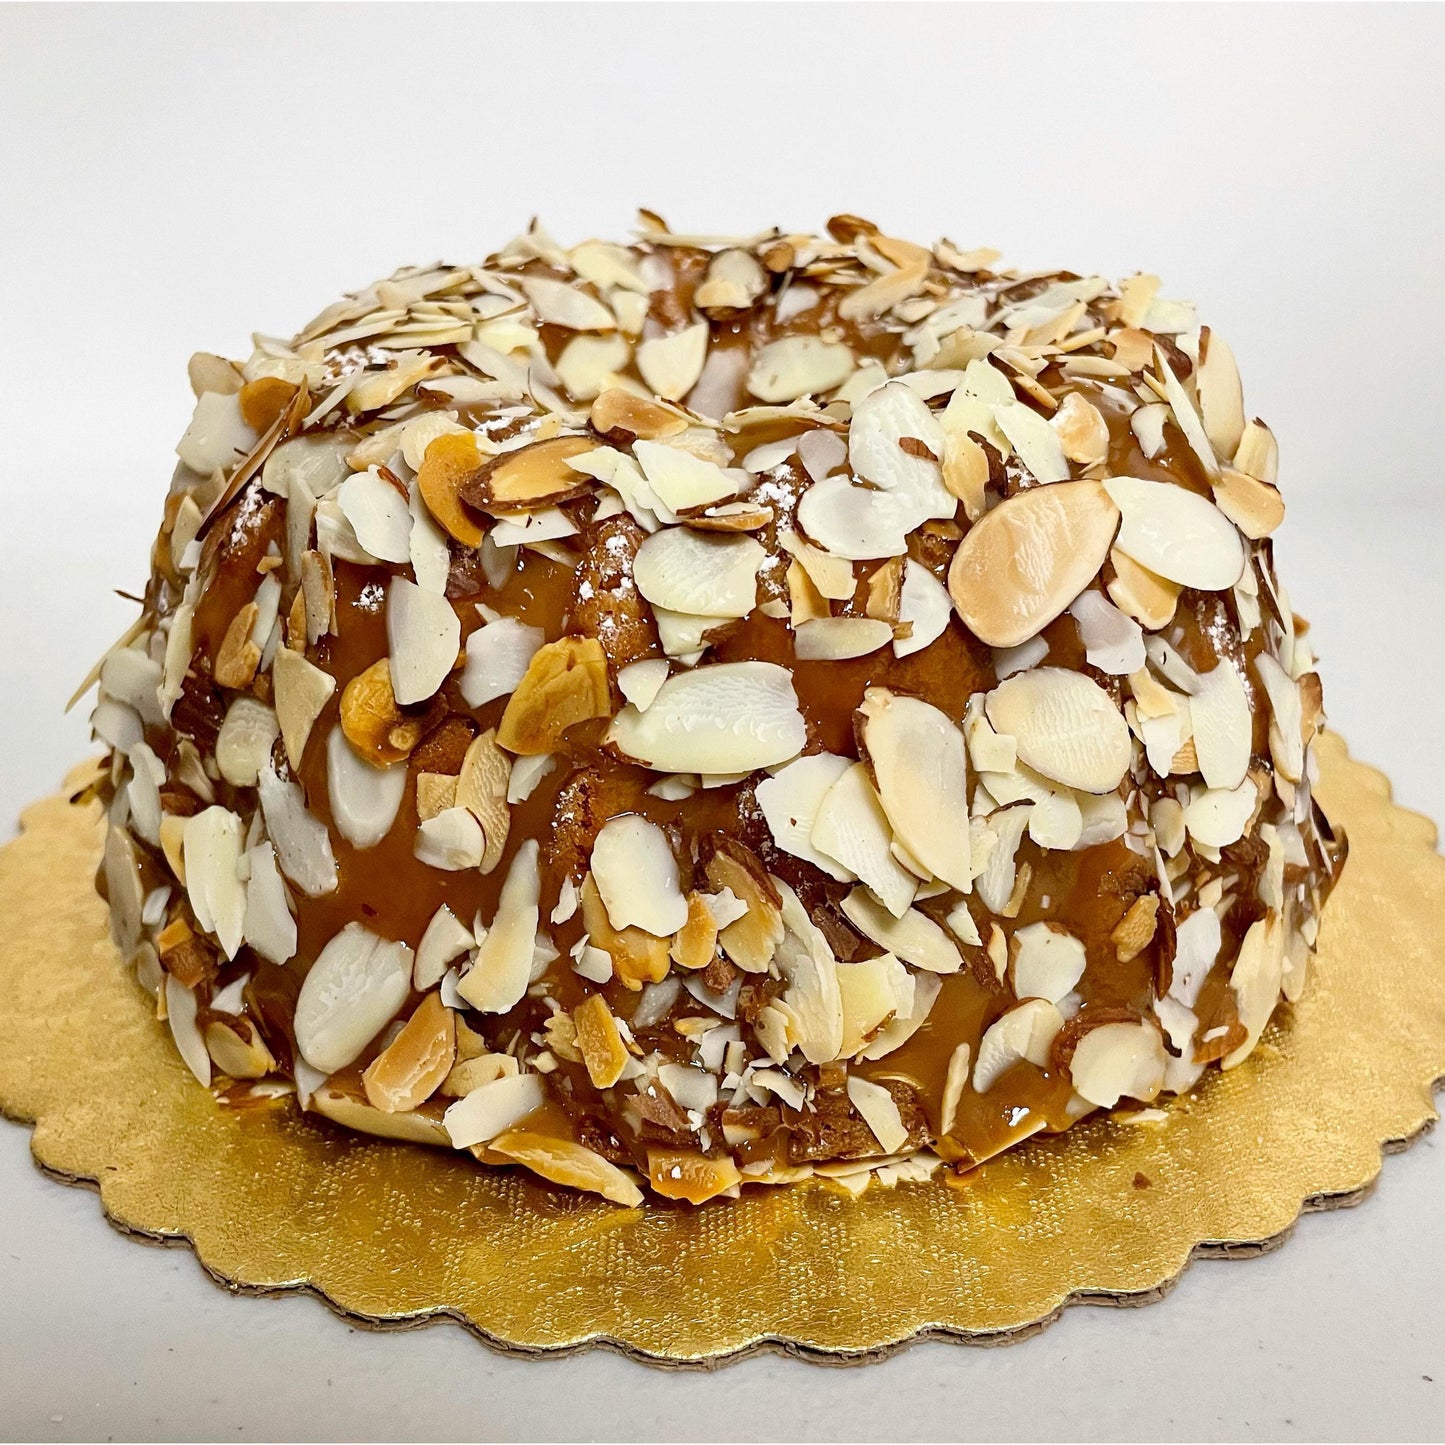 Exquisite Vanilla Caramel cake, a dairy, gluten and sugar-free delight, perfect for those following a Keto or Paleo diet. Full Life Gourmet Bakery